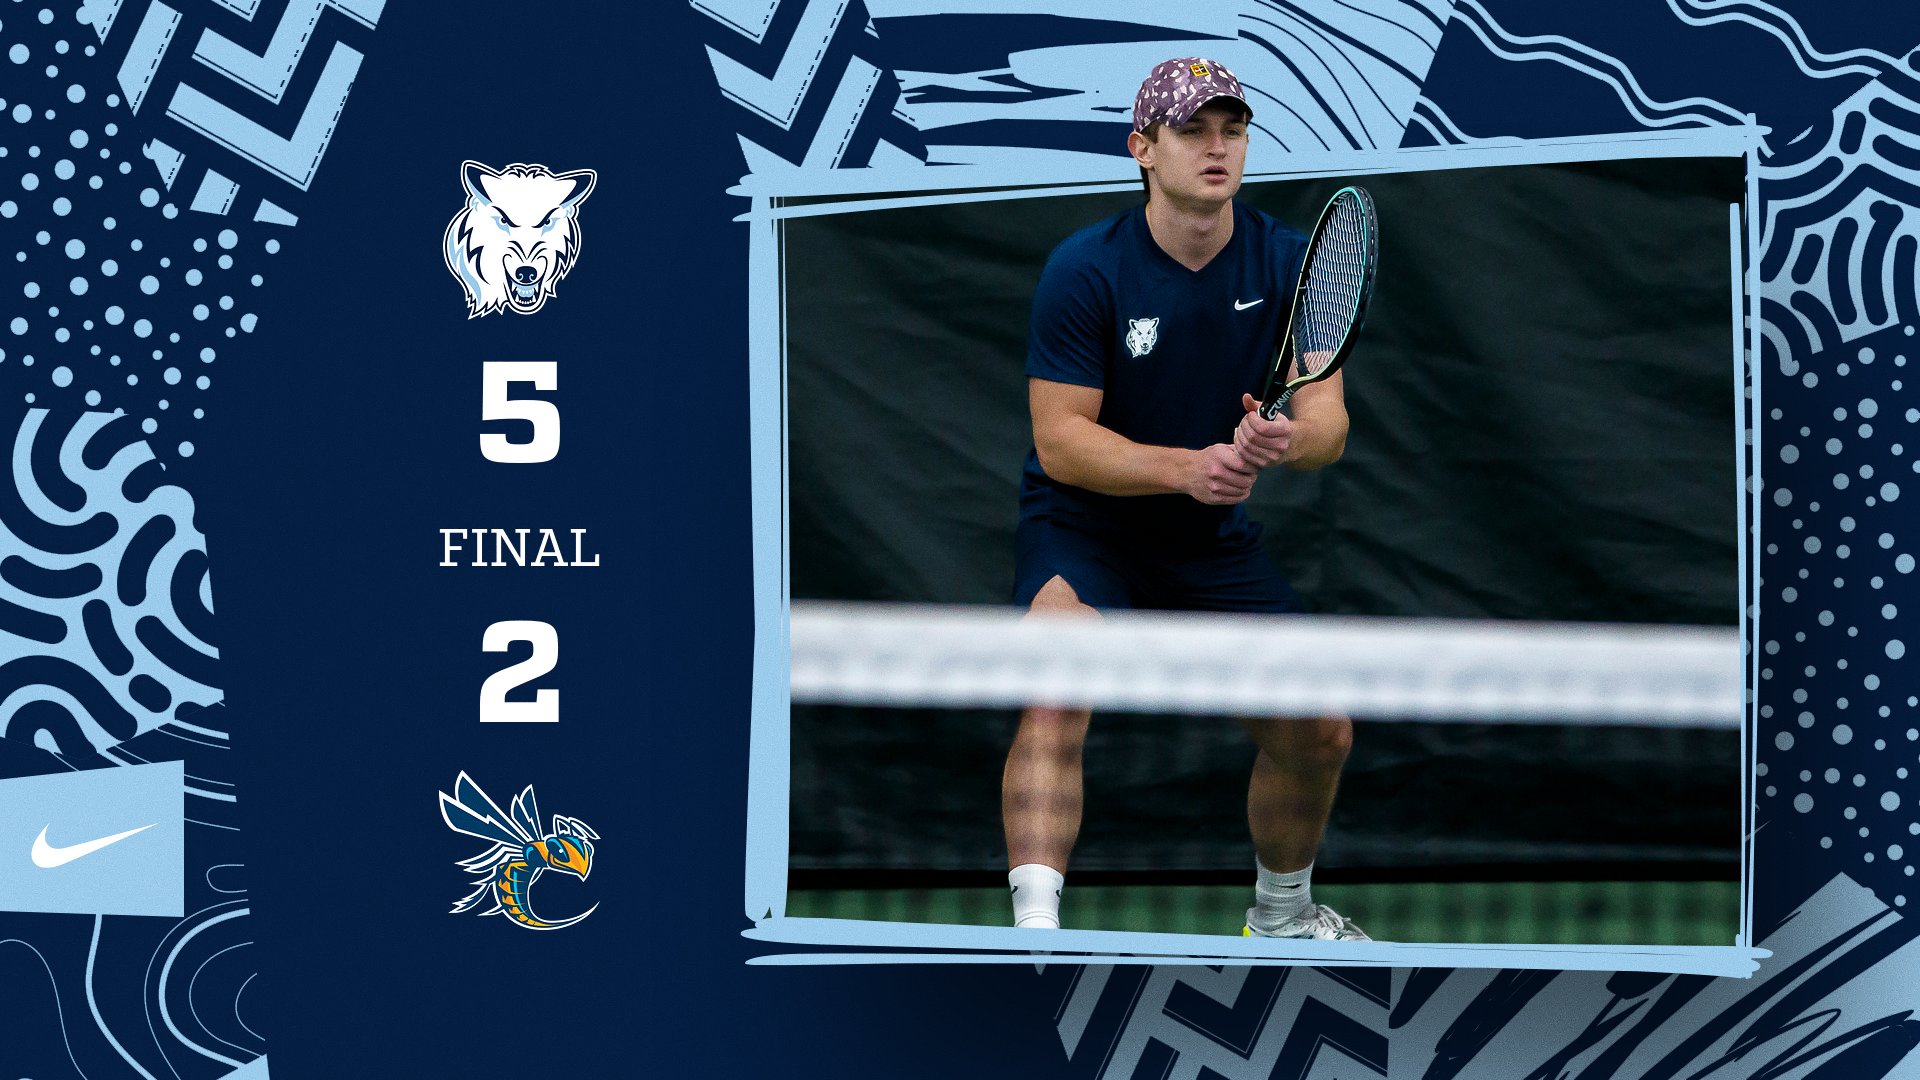 Men’s Tennis Moves to 4-0 in Conference Play, Their Best Start Since 2014